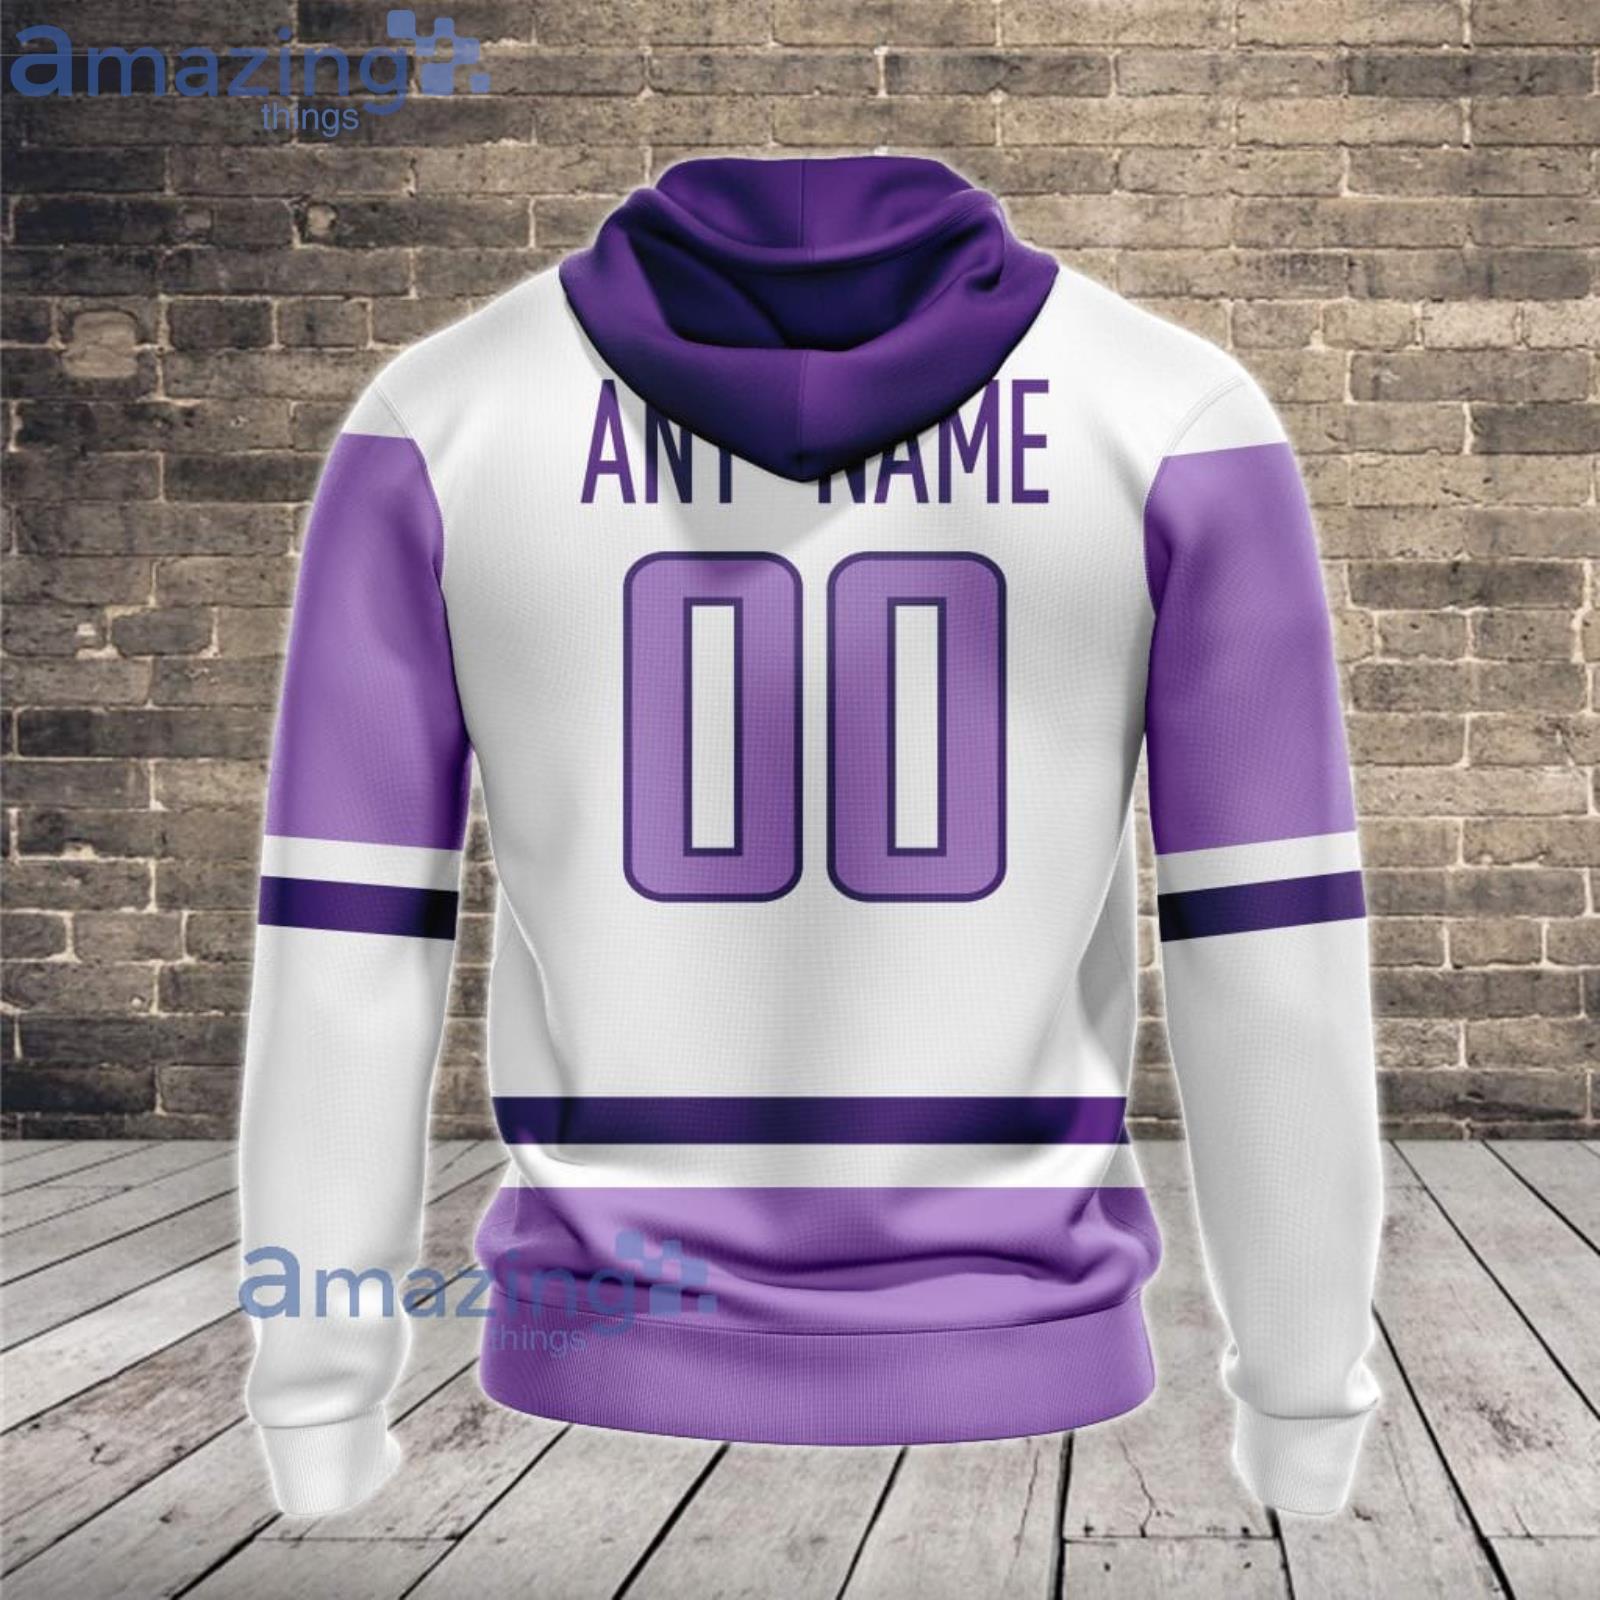 Buffalo Sabres NHL Custom Number And Name 3D Sweatshirt For Fans